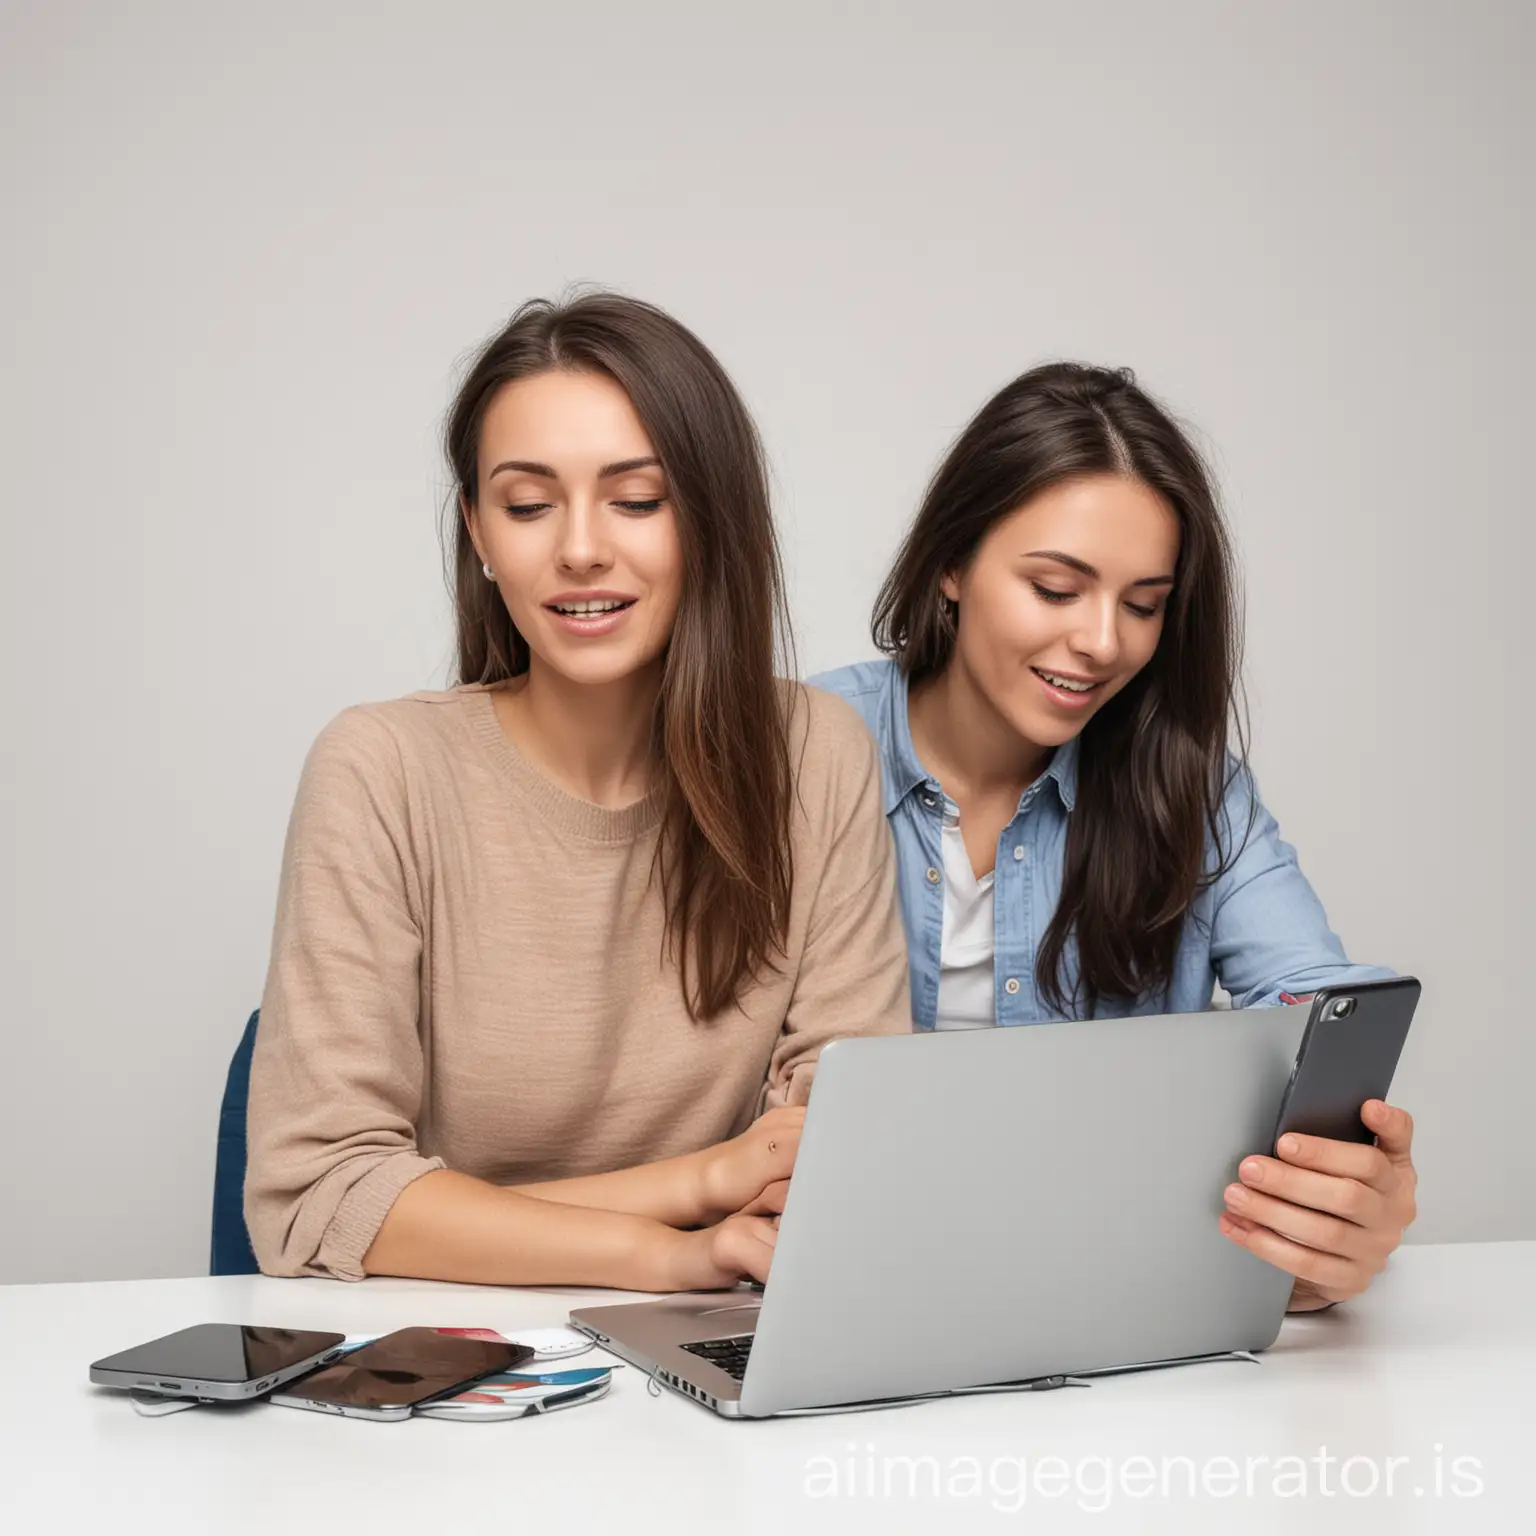 man with laptop, woman with phone, on a white background